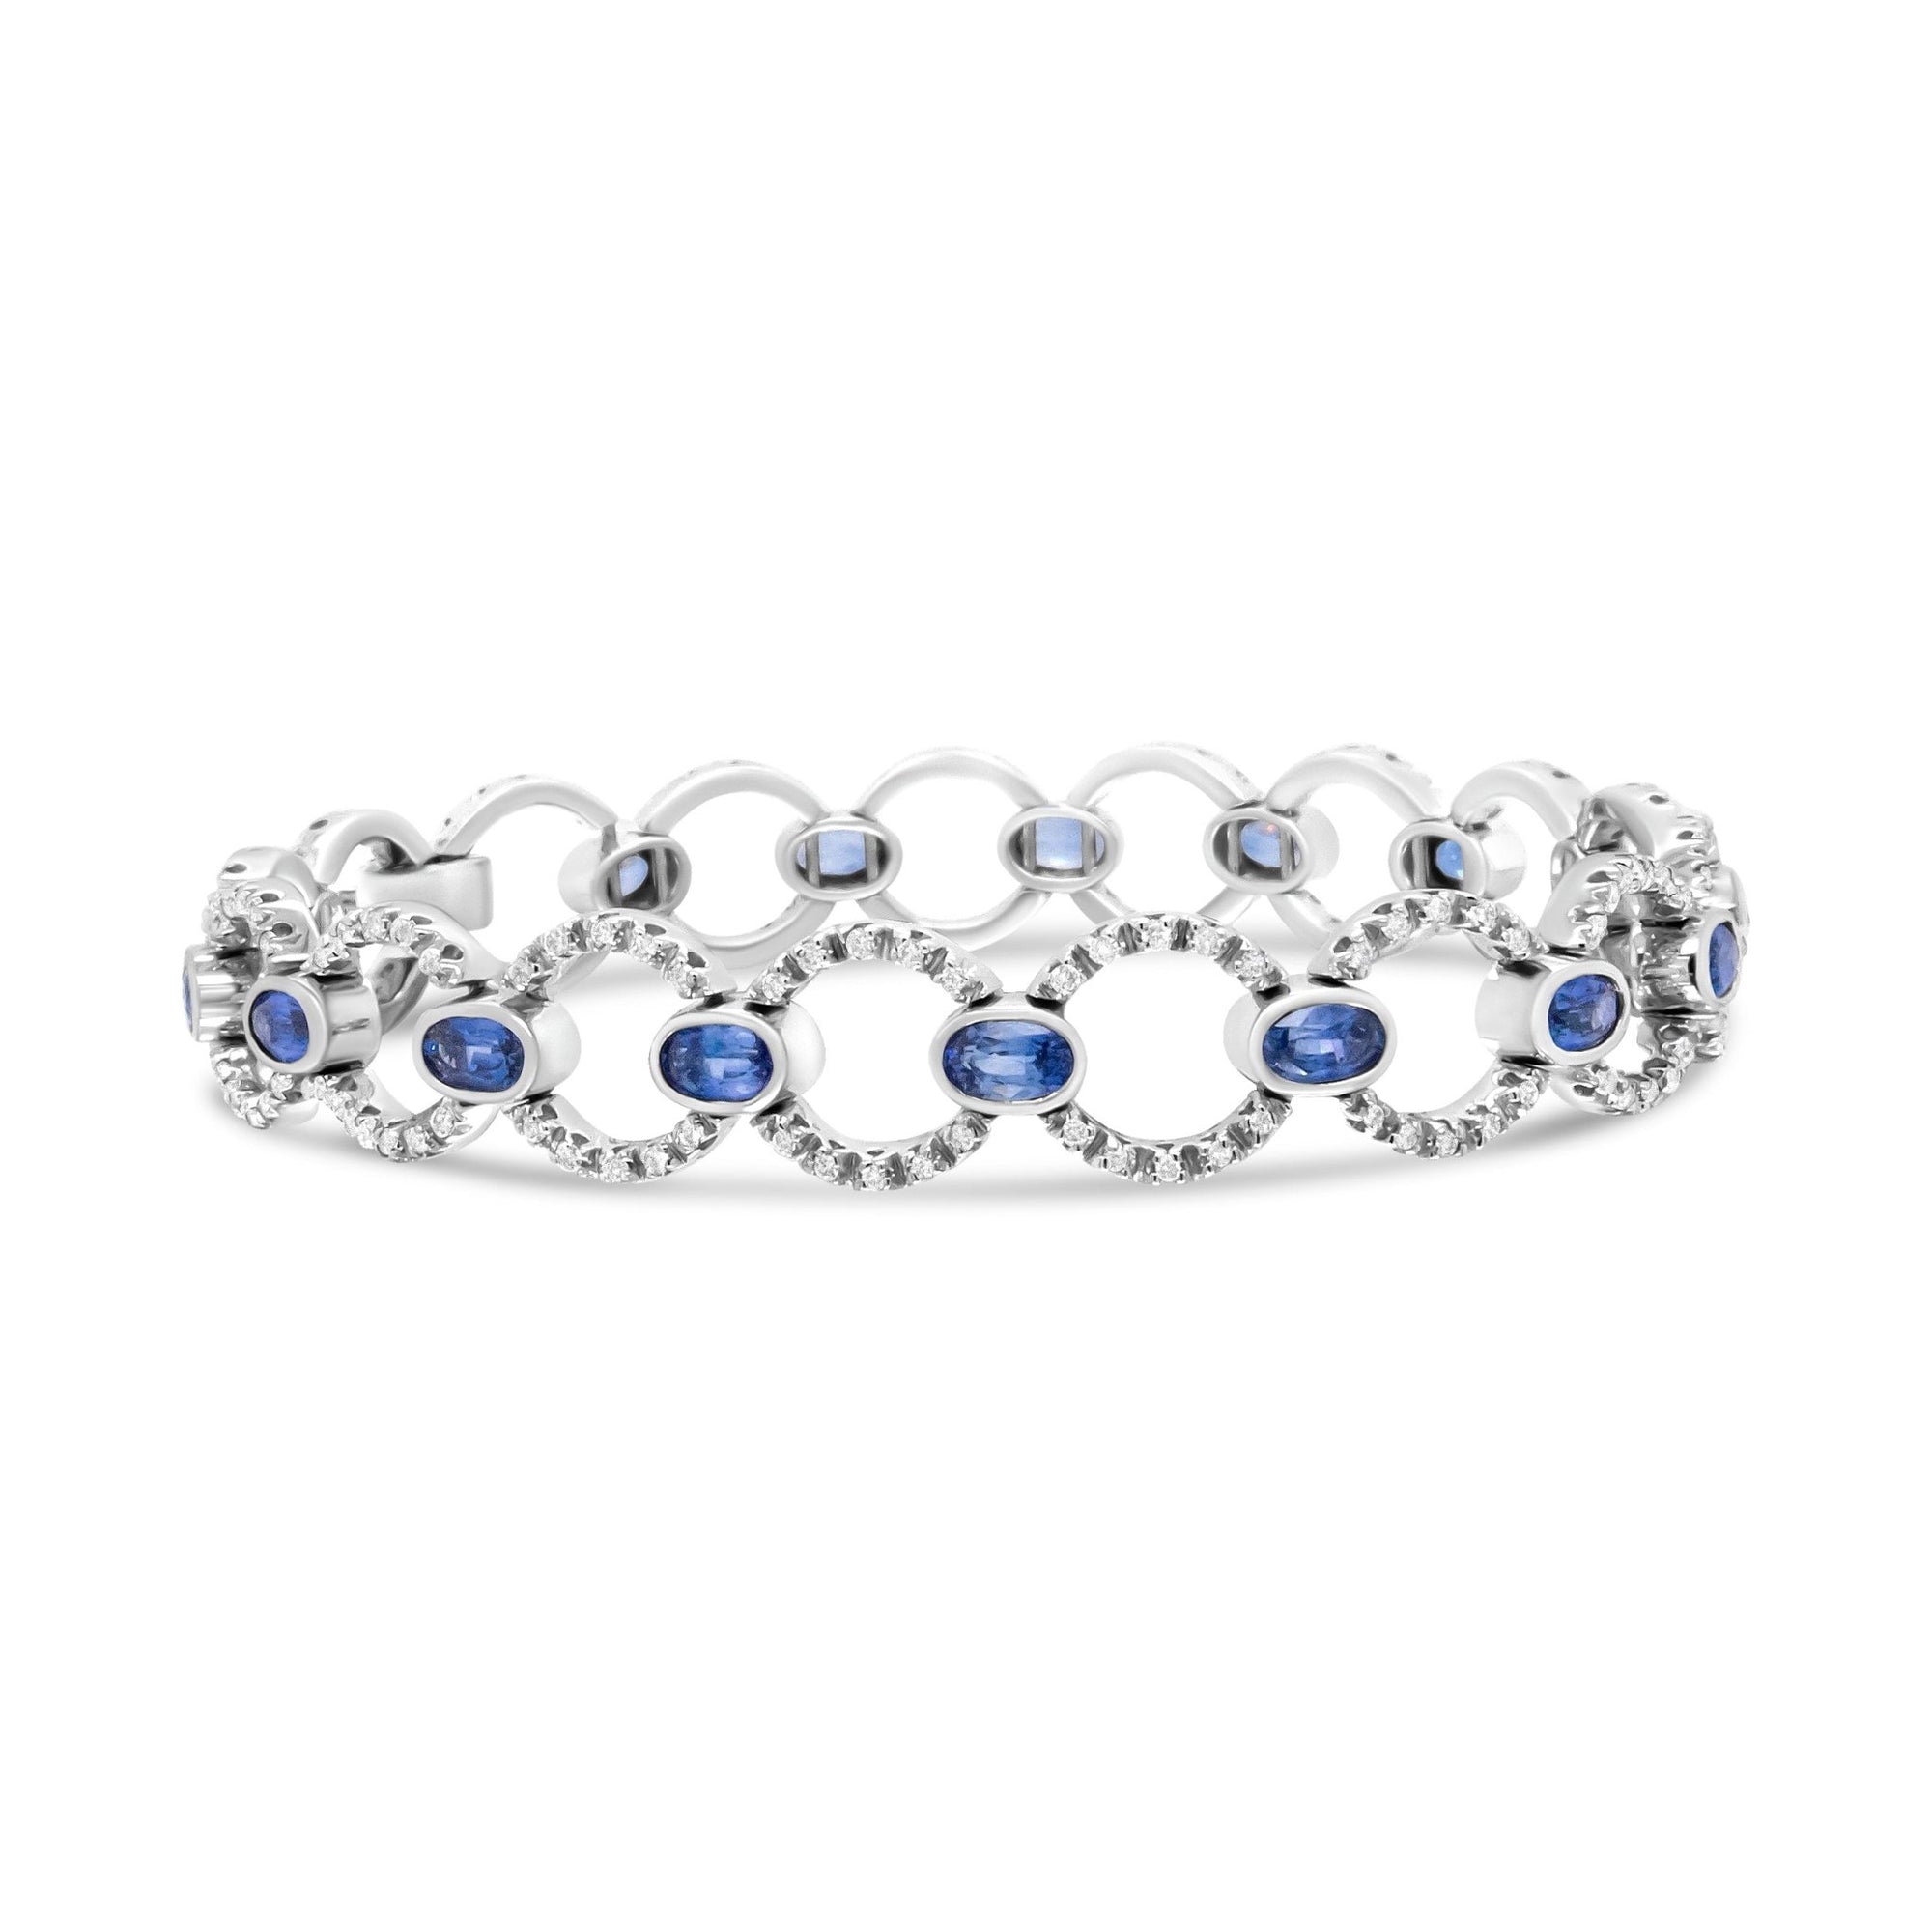 18K White Gold 6 Cttw Diamond and 5x3mm Oval Blue Sapphire Openwork Circle Link Bracelet (F-G Color, SI1-SI2 Clarity) - Size 7" - LinkagejewelrydesignLinkagejewelrydesign